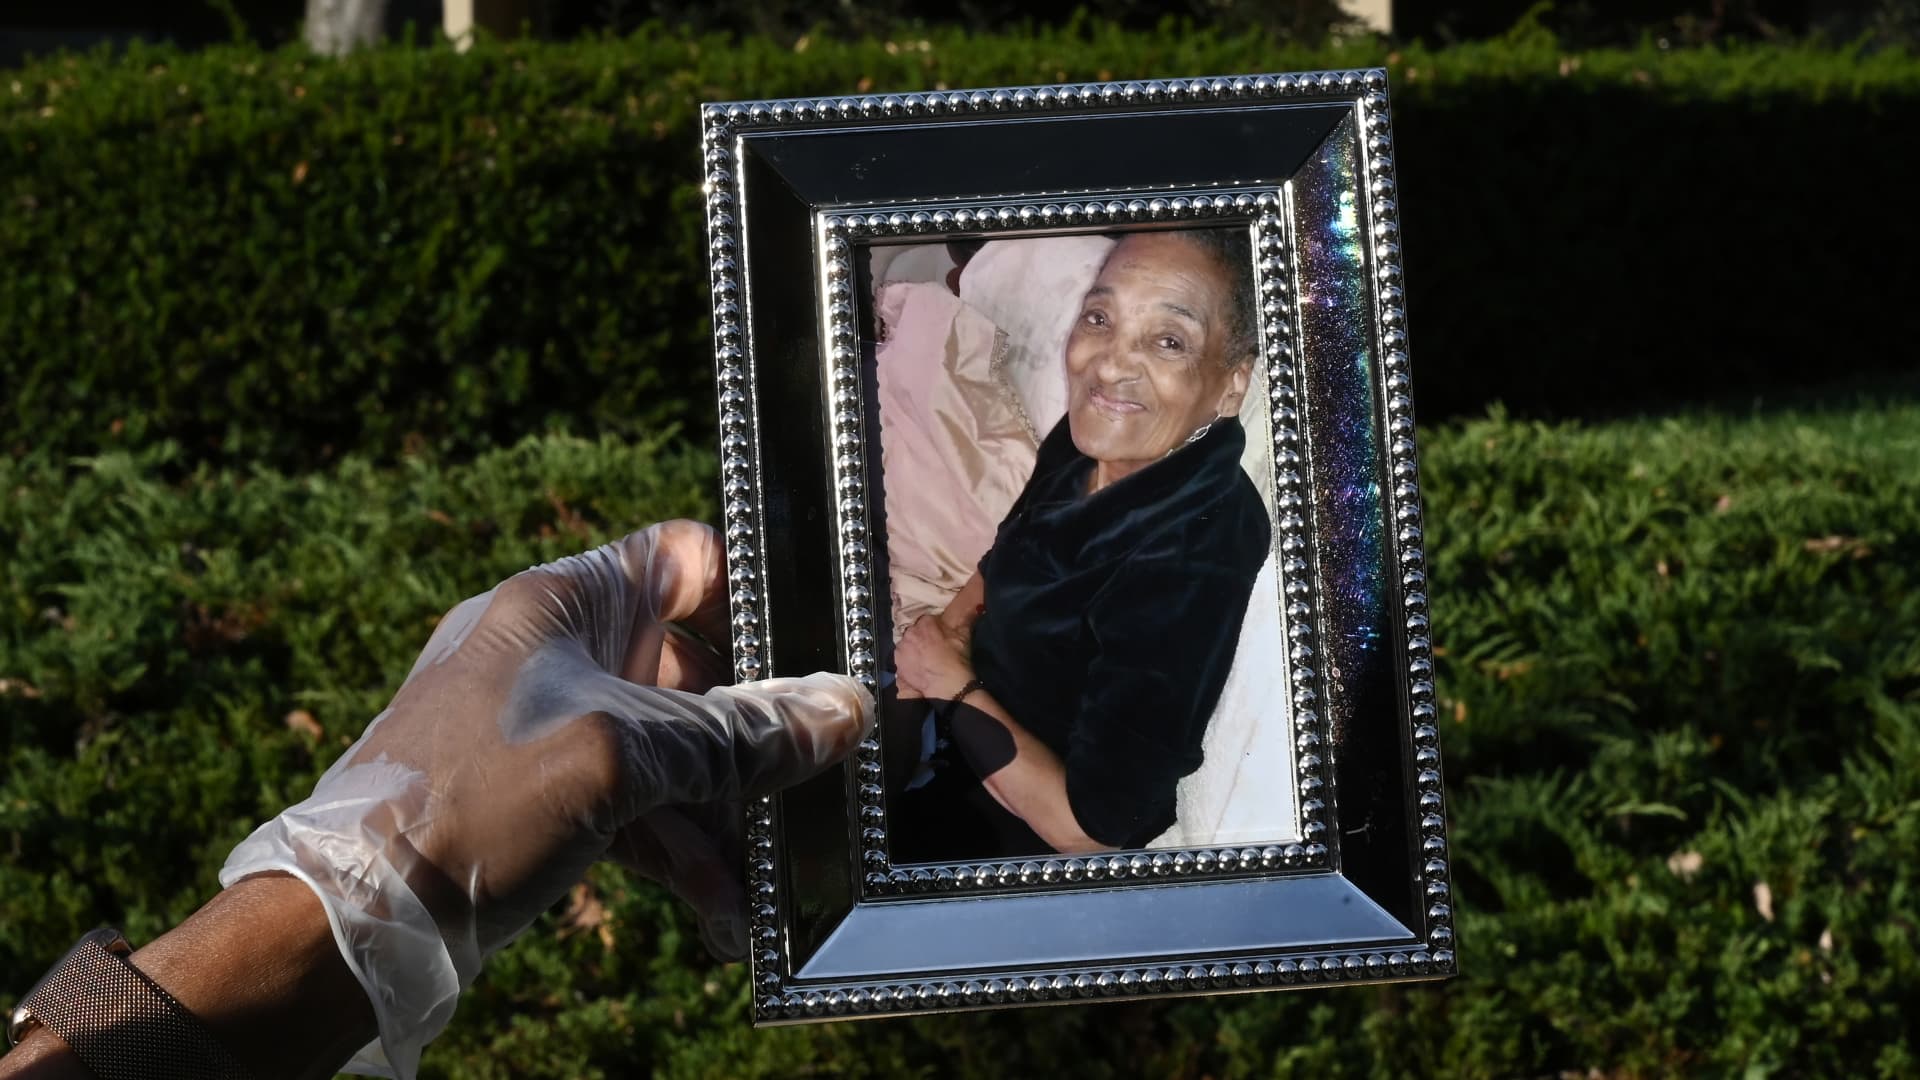 Derede McAlpin holds a photo of her mother, 92-year-old Sara McAlpin, who was diagnosed with Covid-19 in Rockville, MD.